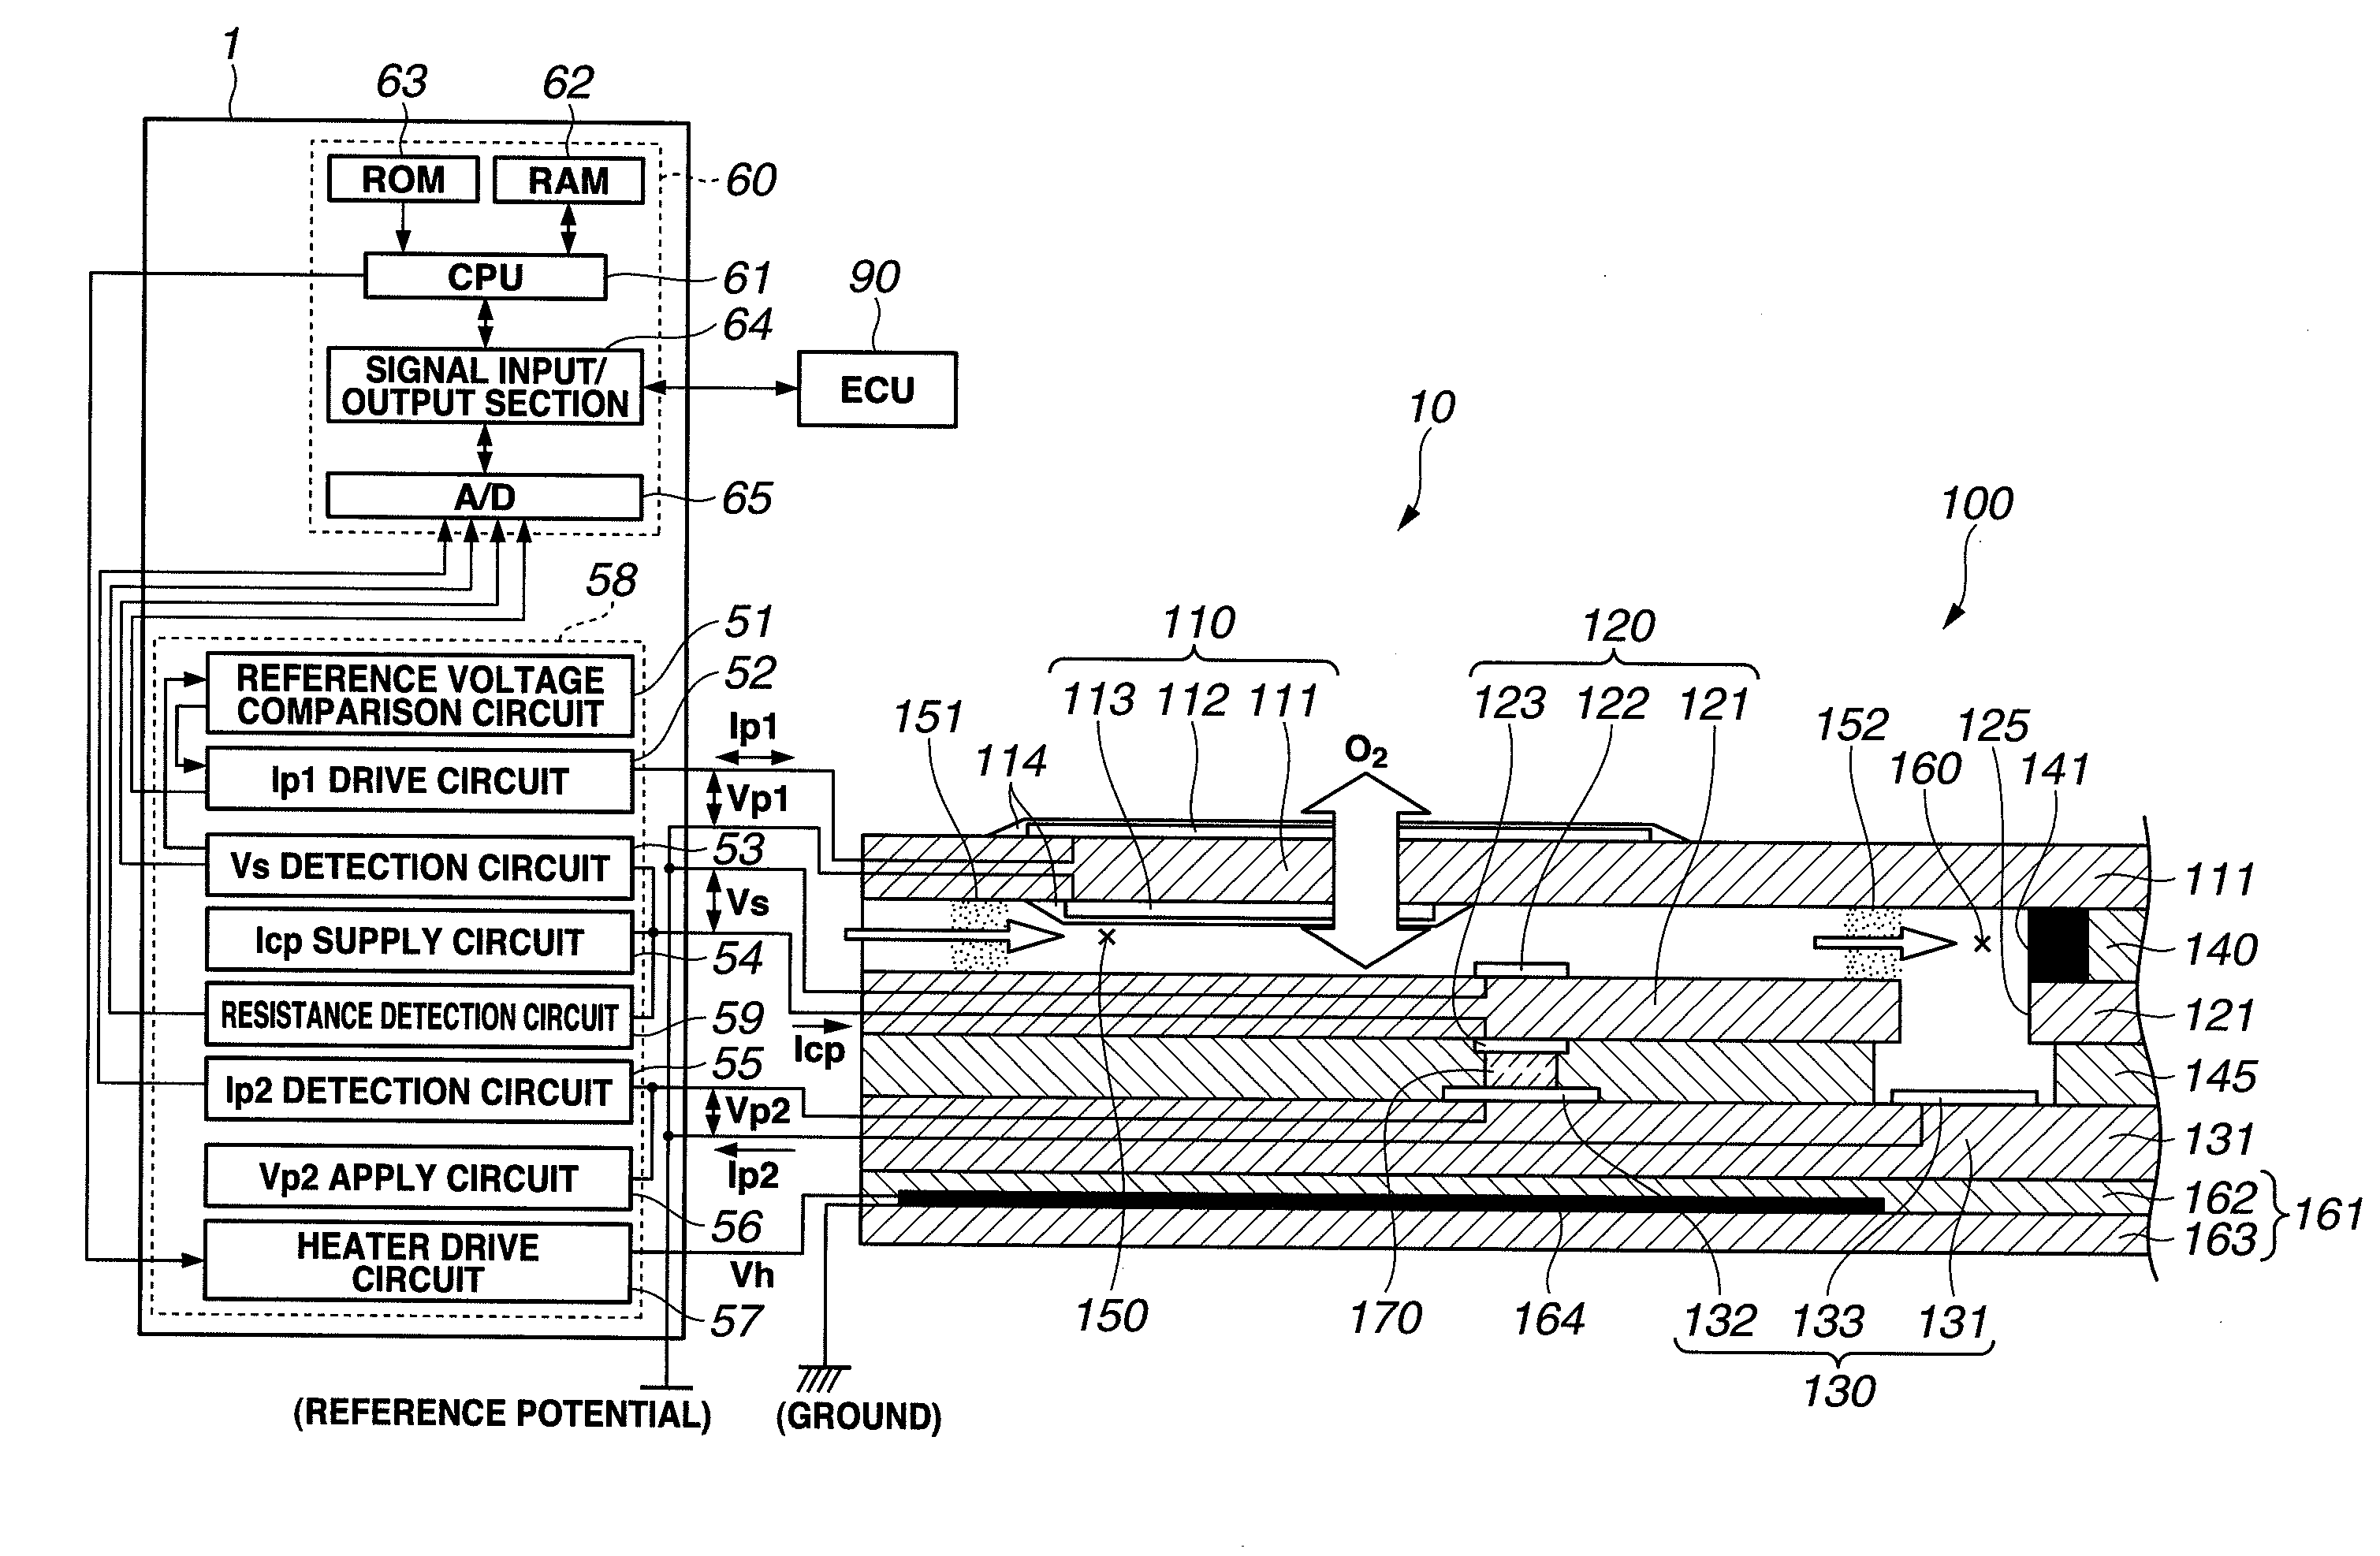 Apparatus and method for controlling a gas sensor